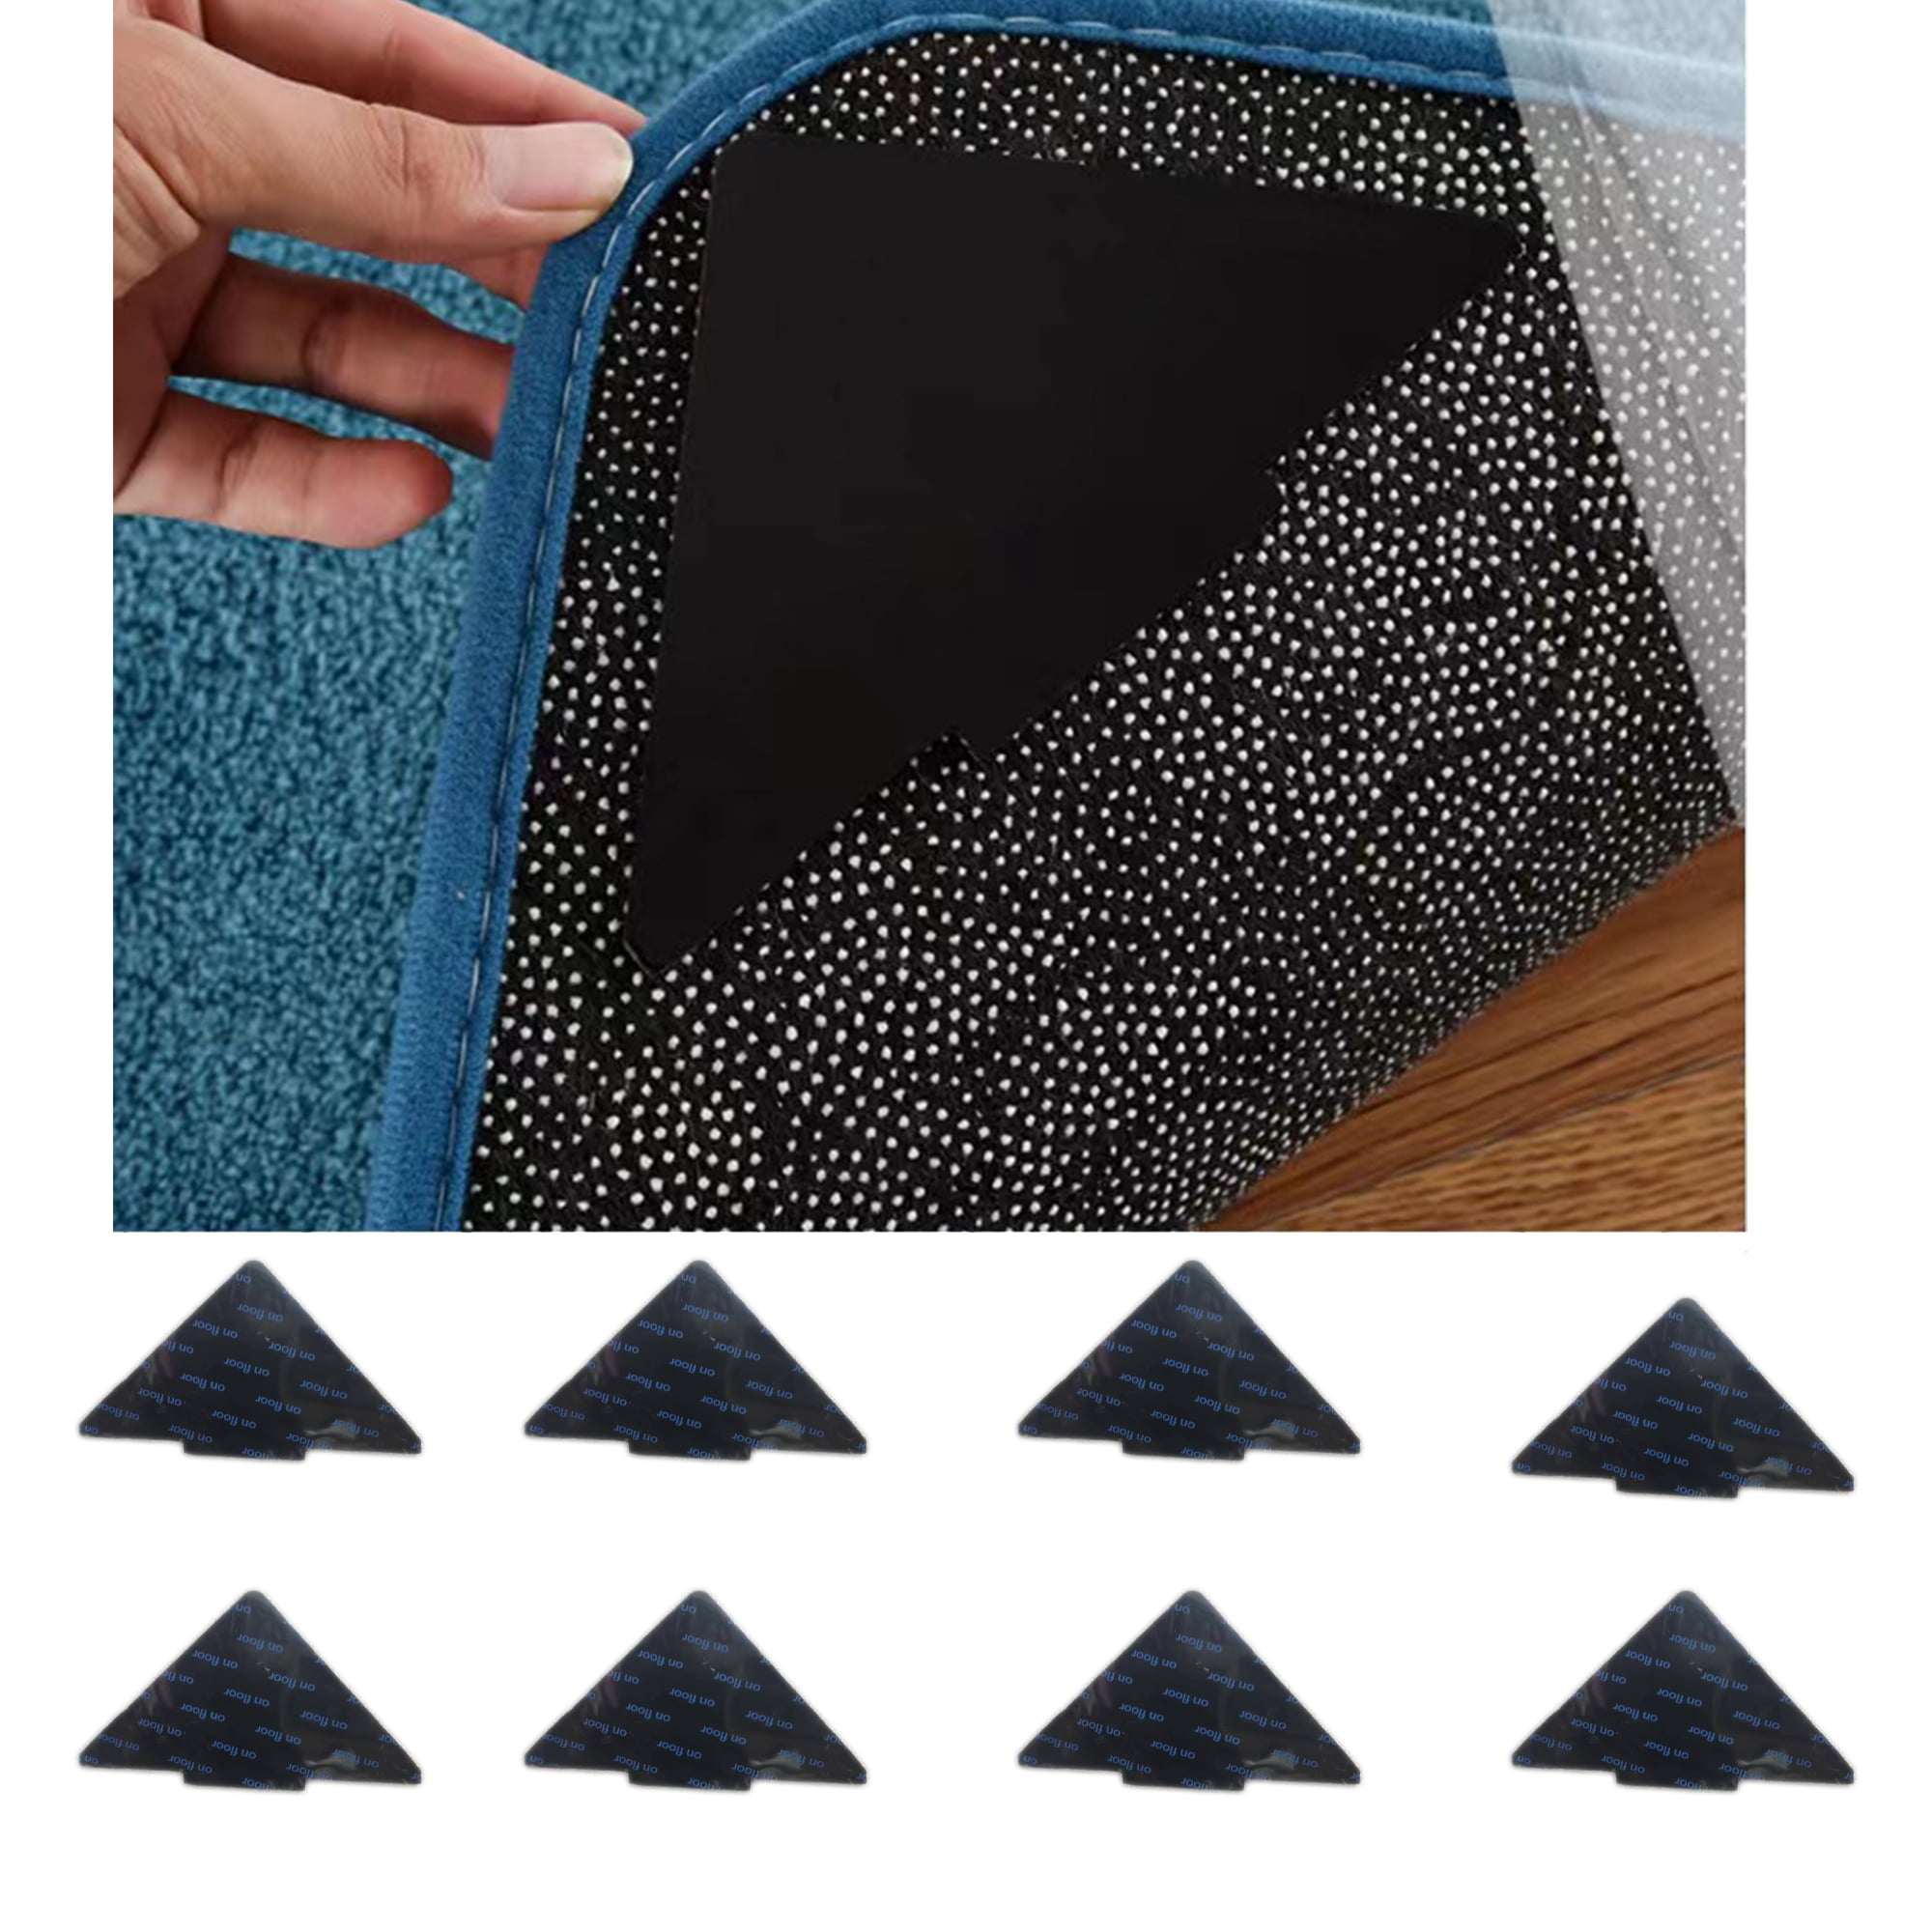 8 Pack Rug Grippers Washable Reusable Rug Tape Carpet Holder for Hardwood  Floors Tile Dual Sided Prevents Curl Anti Rug Slip Pads Rug Stickers for  Area Rugs Size 3.3×3.3×0.08 Inch Heart Shape 